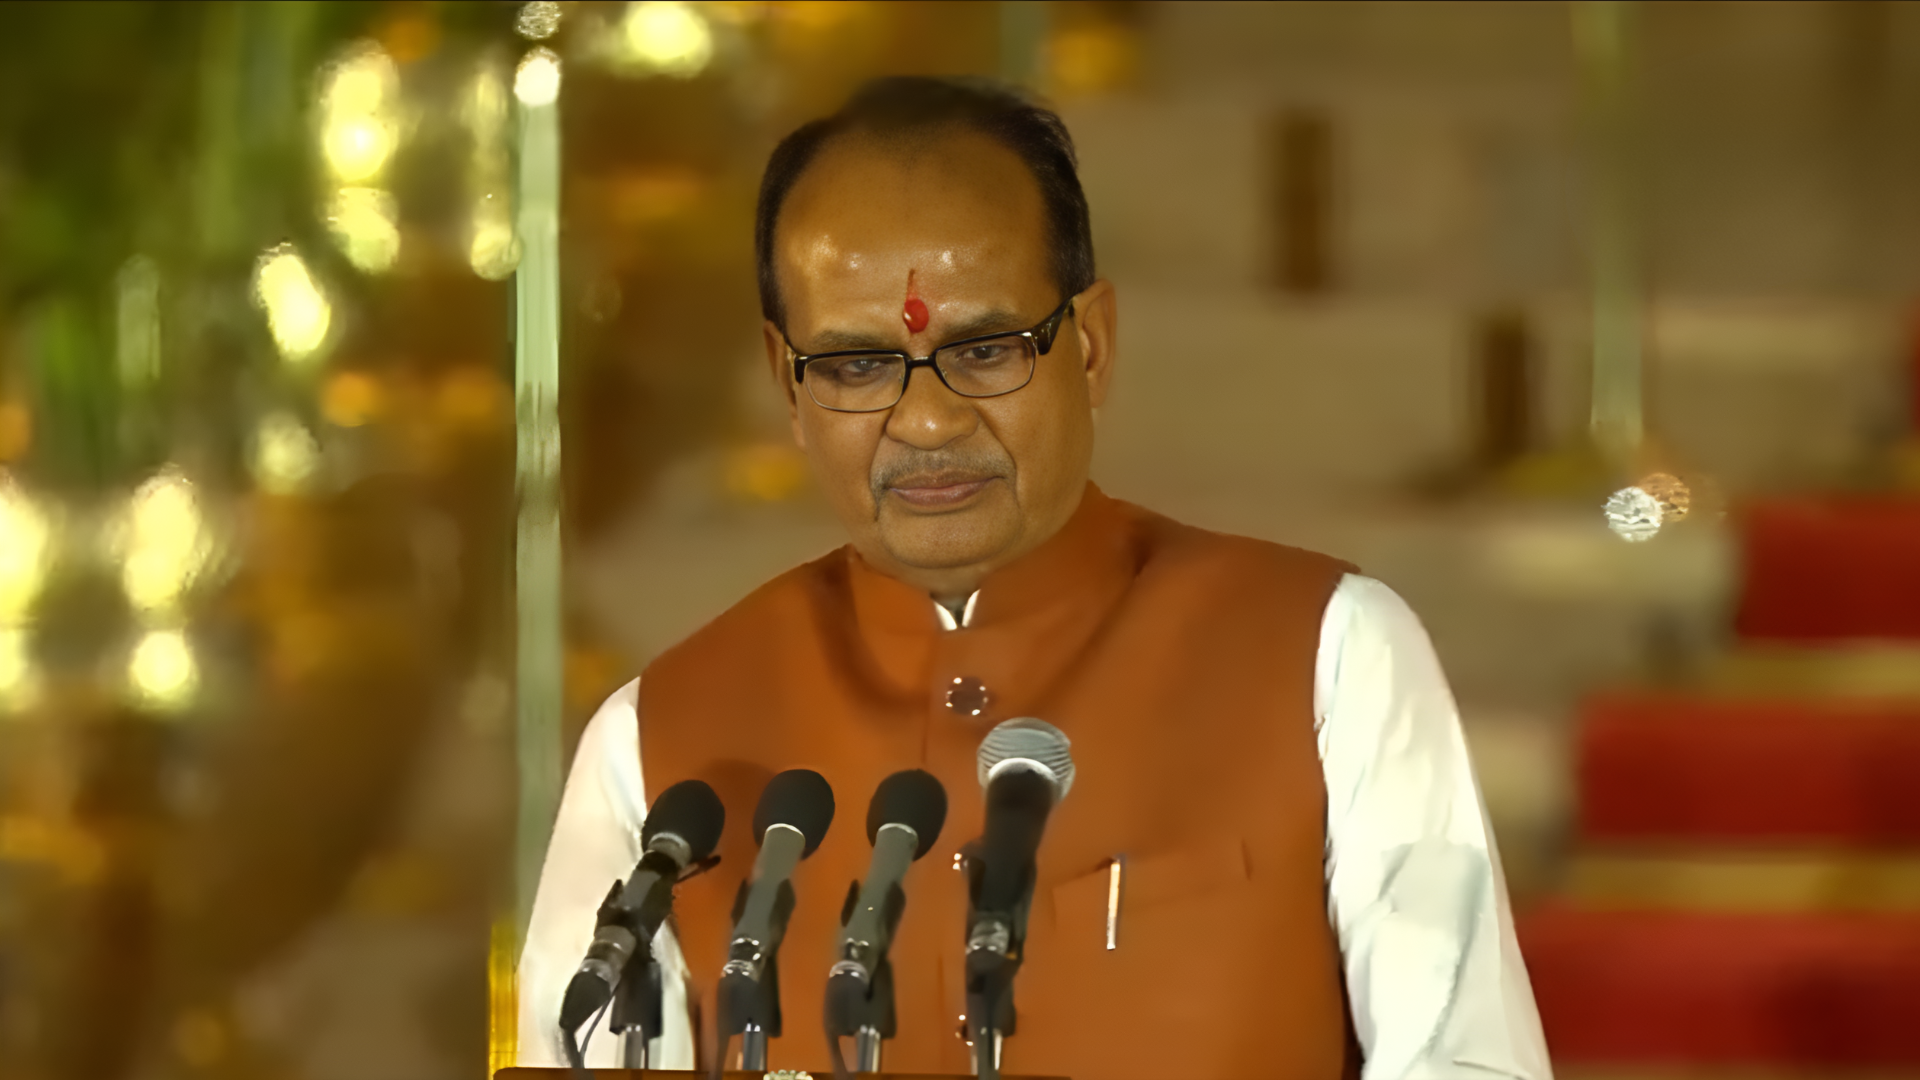 Cabinet Portfolio Announcement Updates: Shivraj Singh Chouhan Appointed As Agri Minister In Modi 3.0 Cabinet